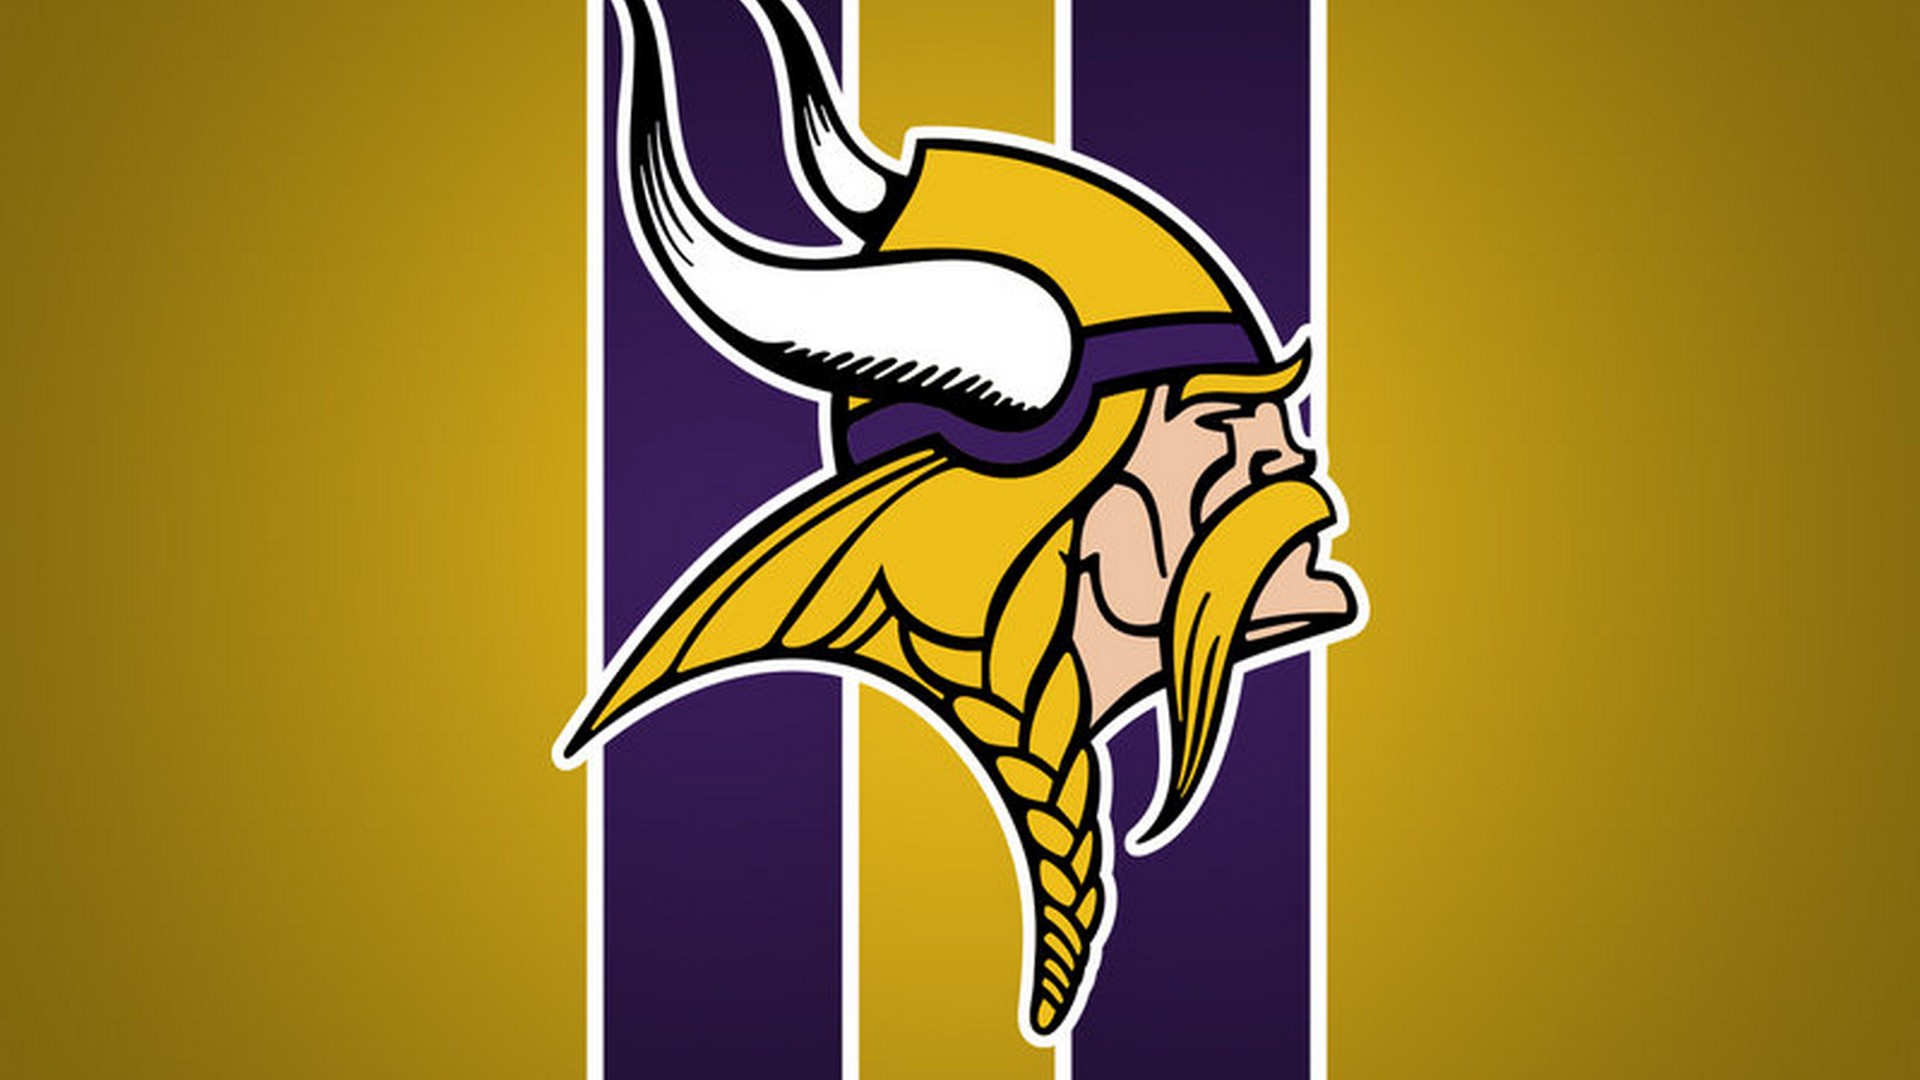 HD Minnesota Vikings Backgrounds With Resolution 1920X1080 pixel. You can make this wallpaper for your Mac or Windows Desktop Background, iPhone, Android or Tablet and another Smartphone device for free